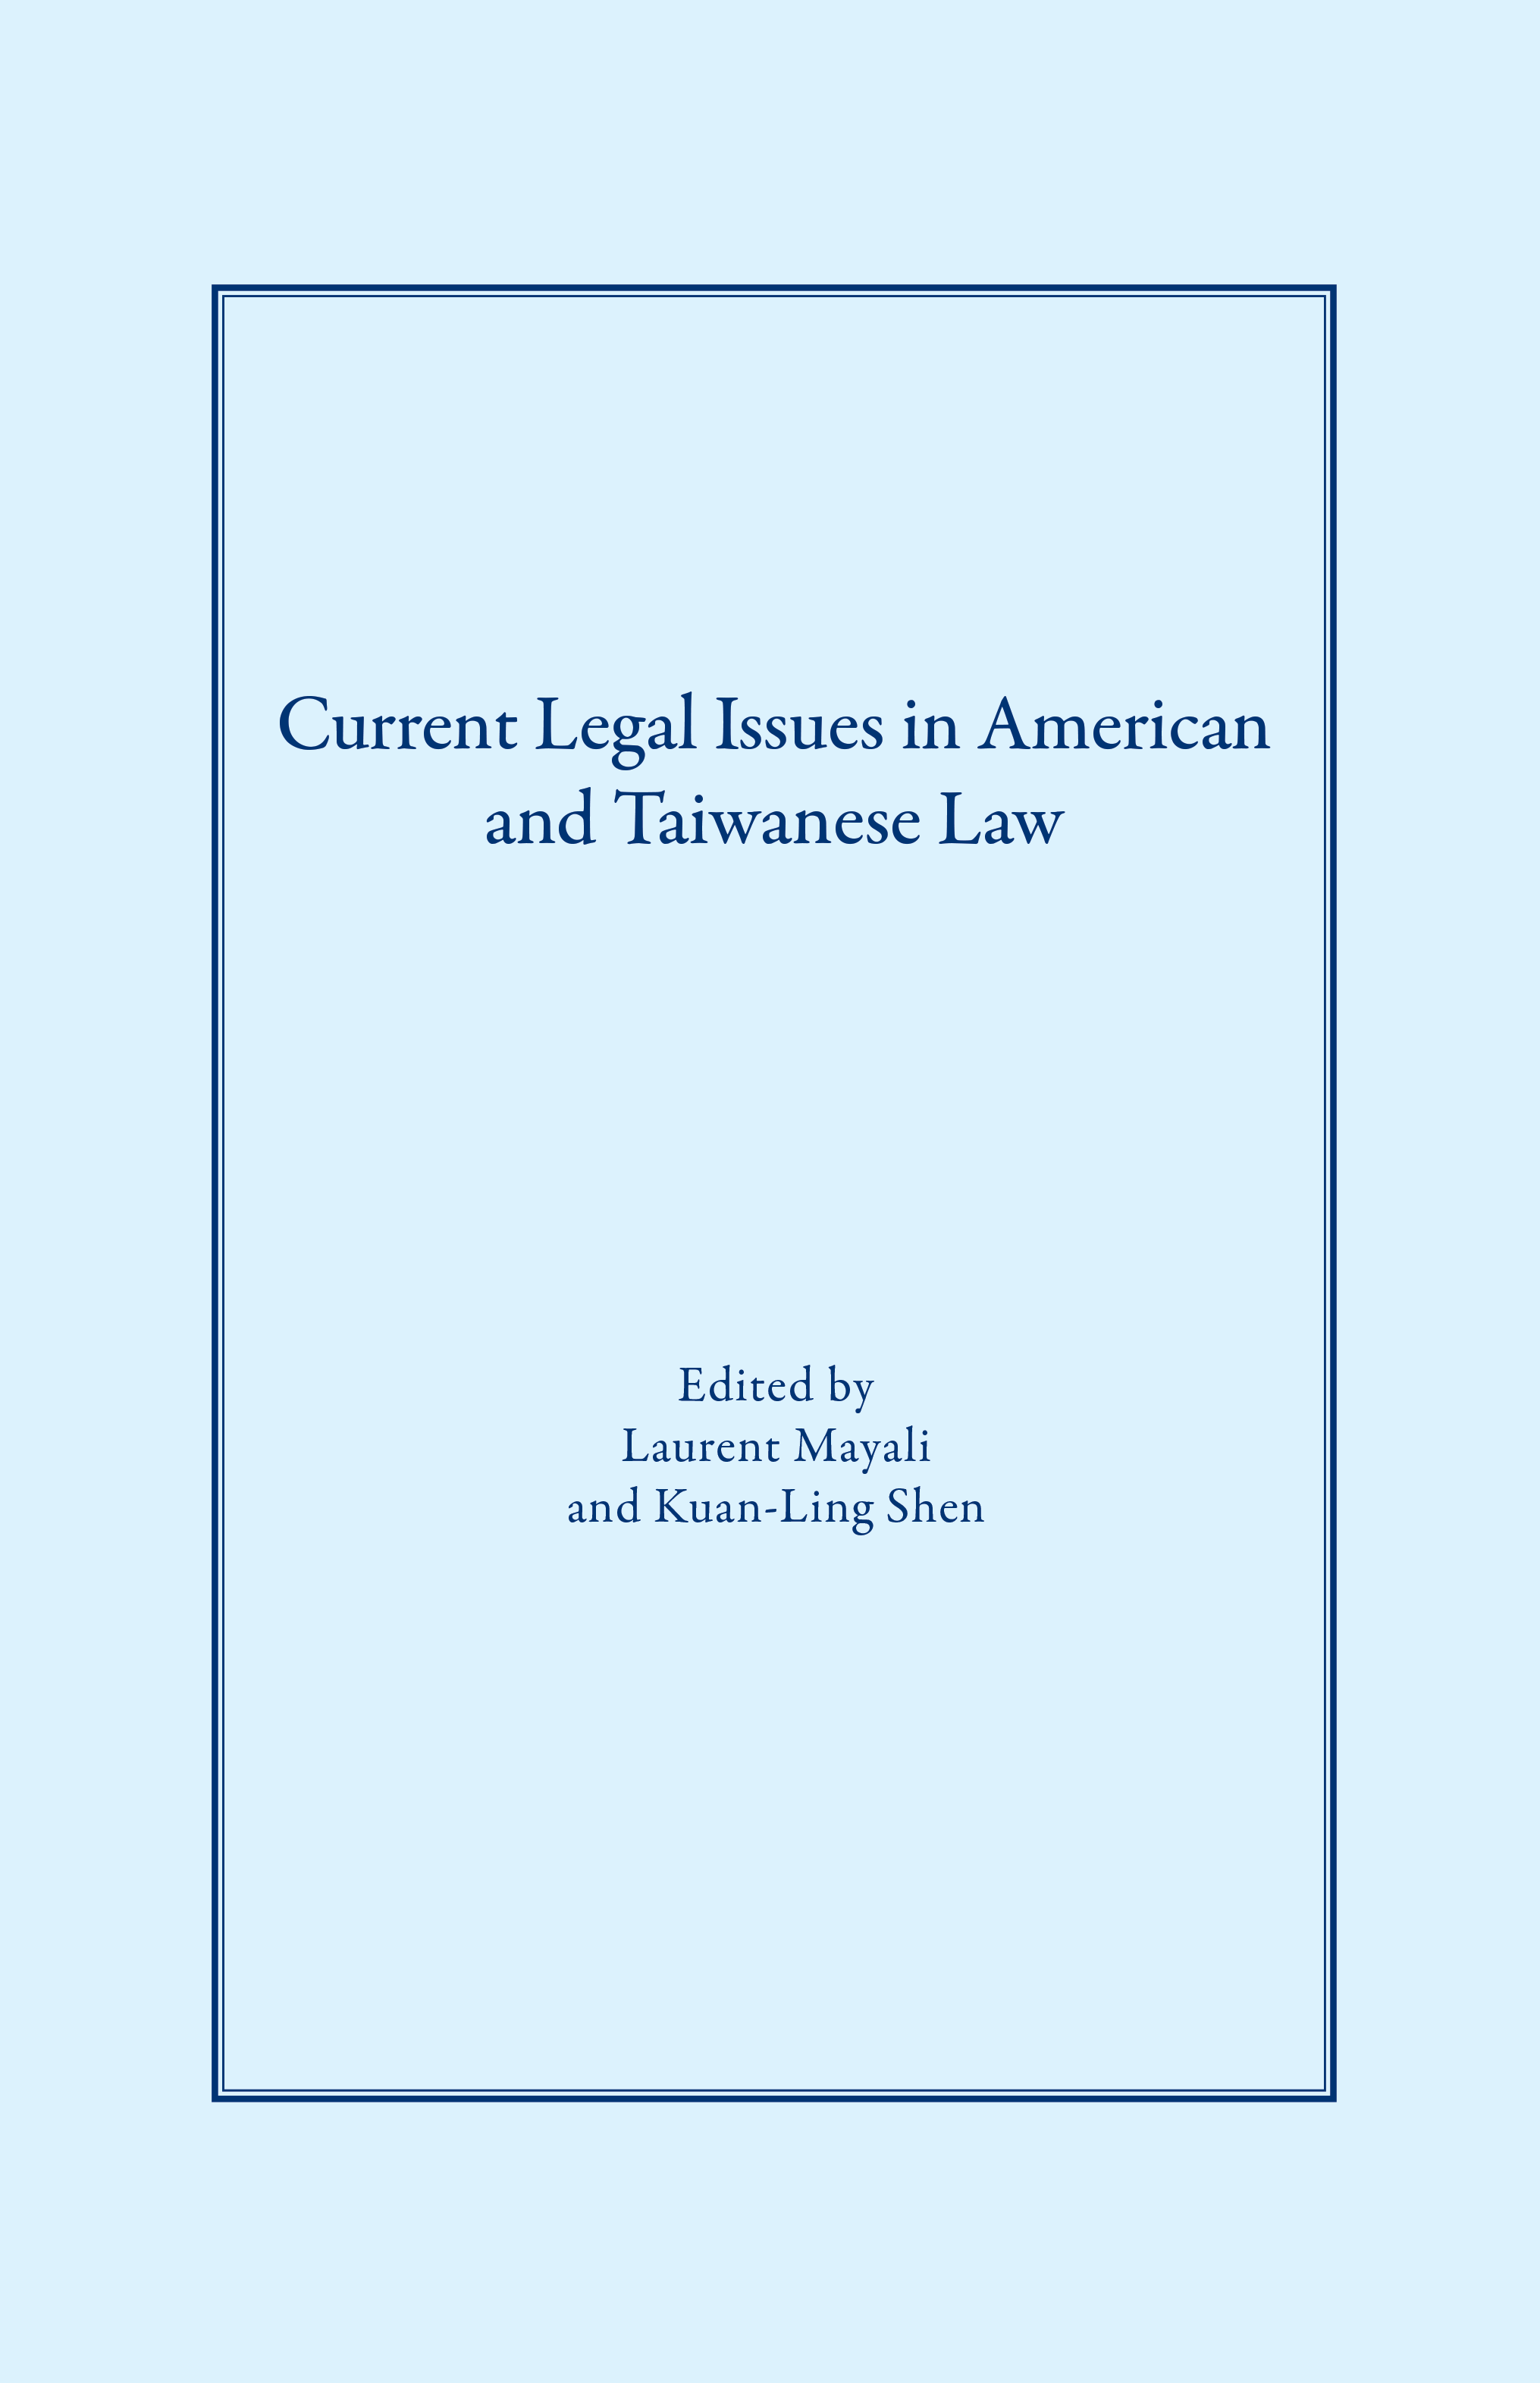 Cover of the book Current Legal Issues in American and Taiwanese Law, edited by Laurent Mayali and Kaun-Ling Shen